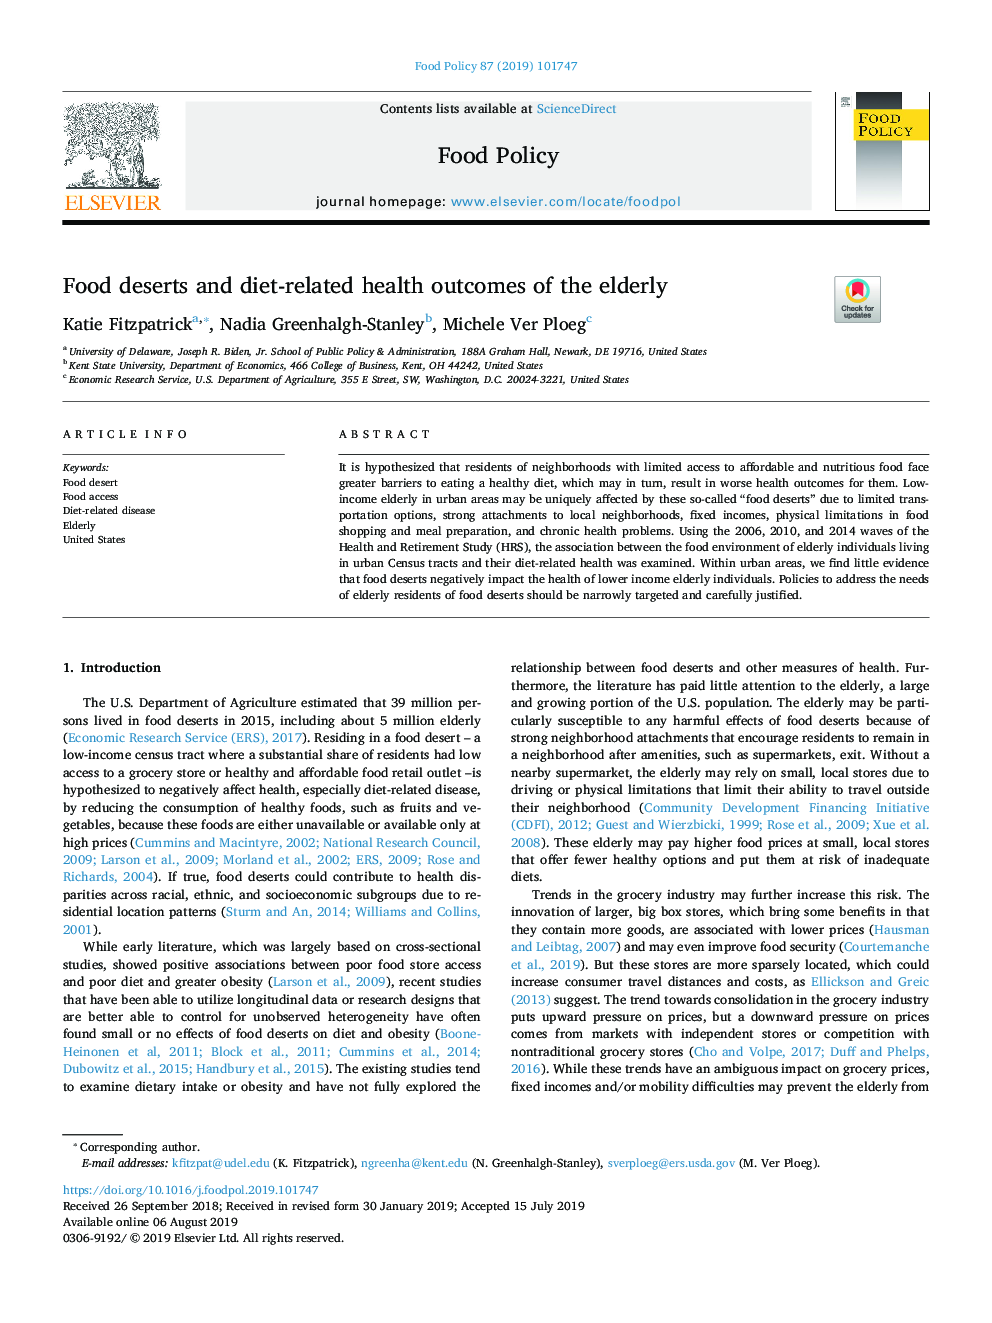 Food deserts and diet-related health outcomes of the elderly